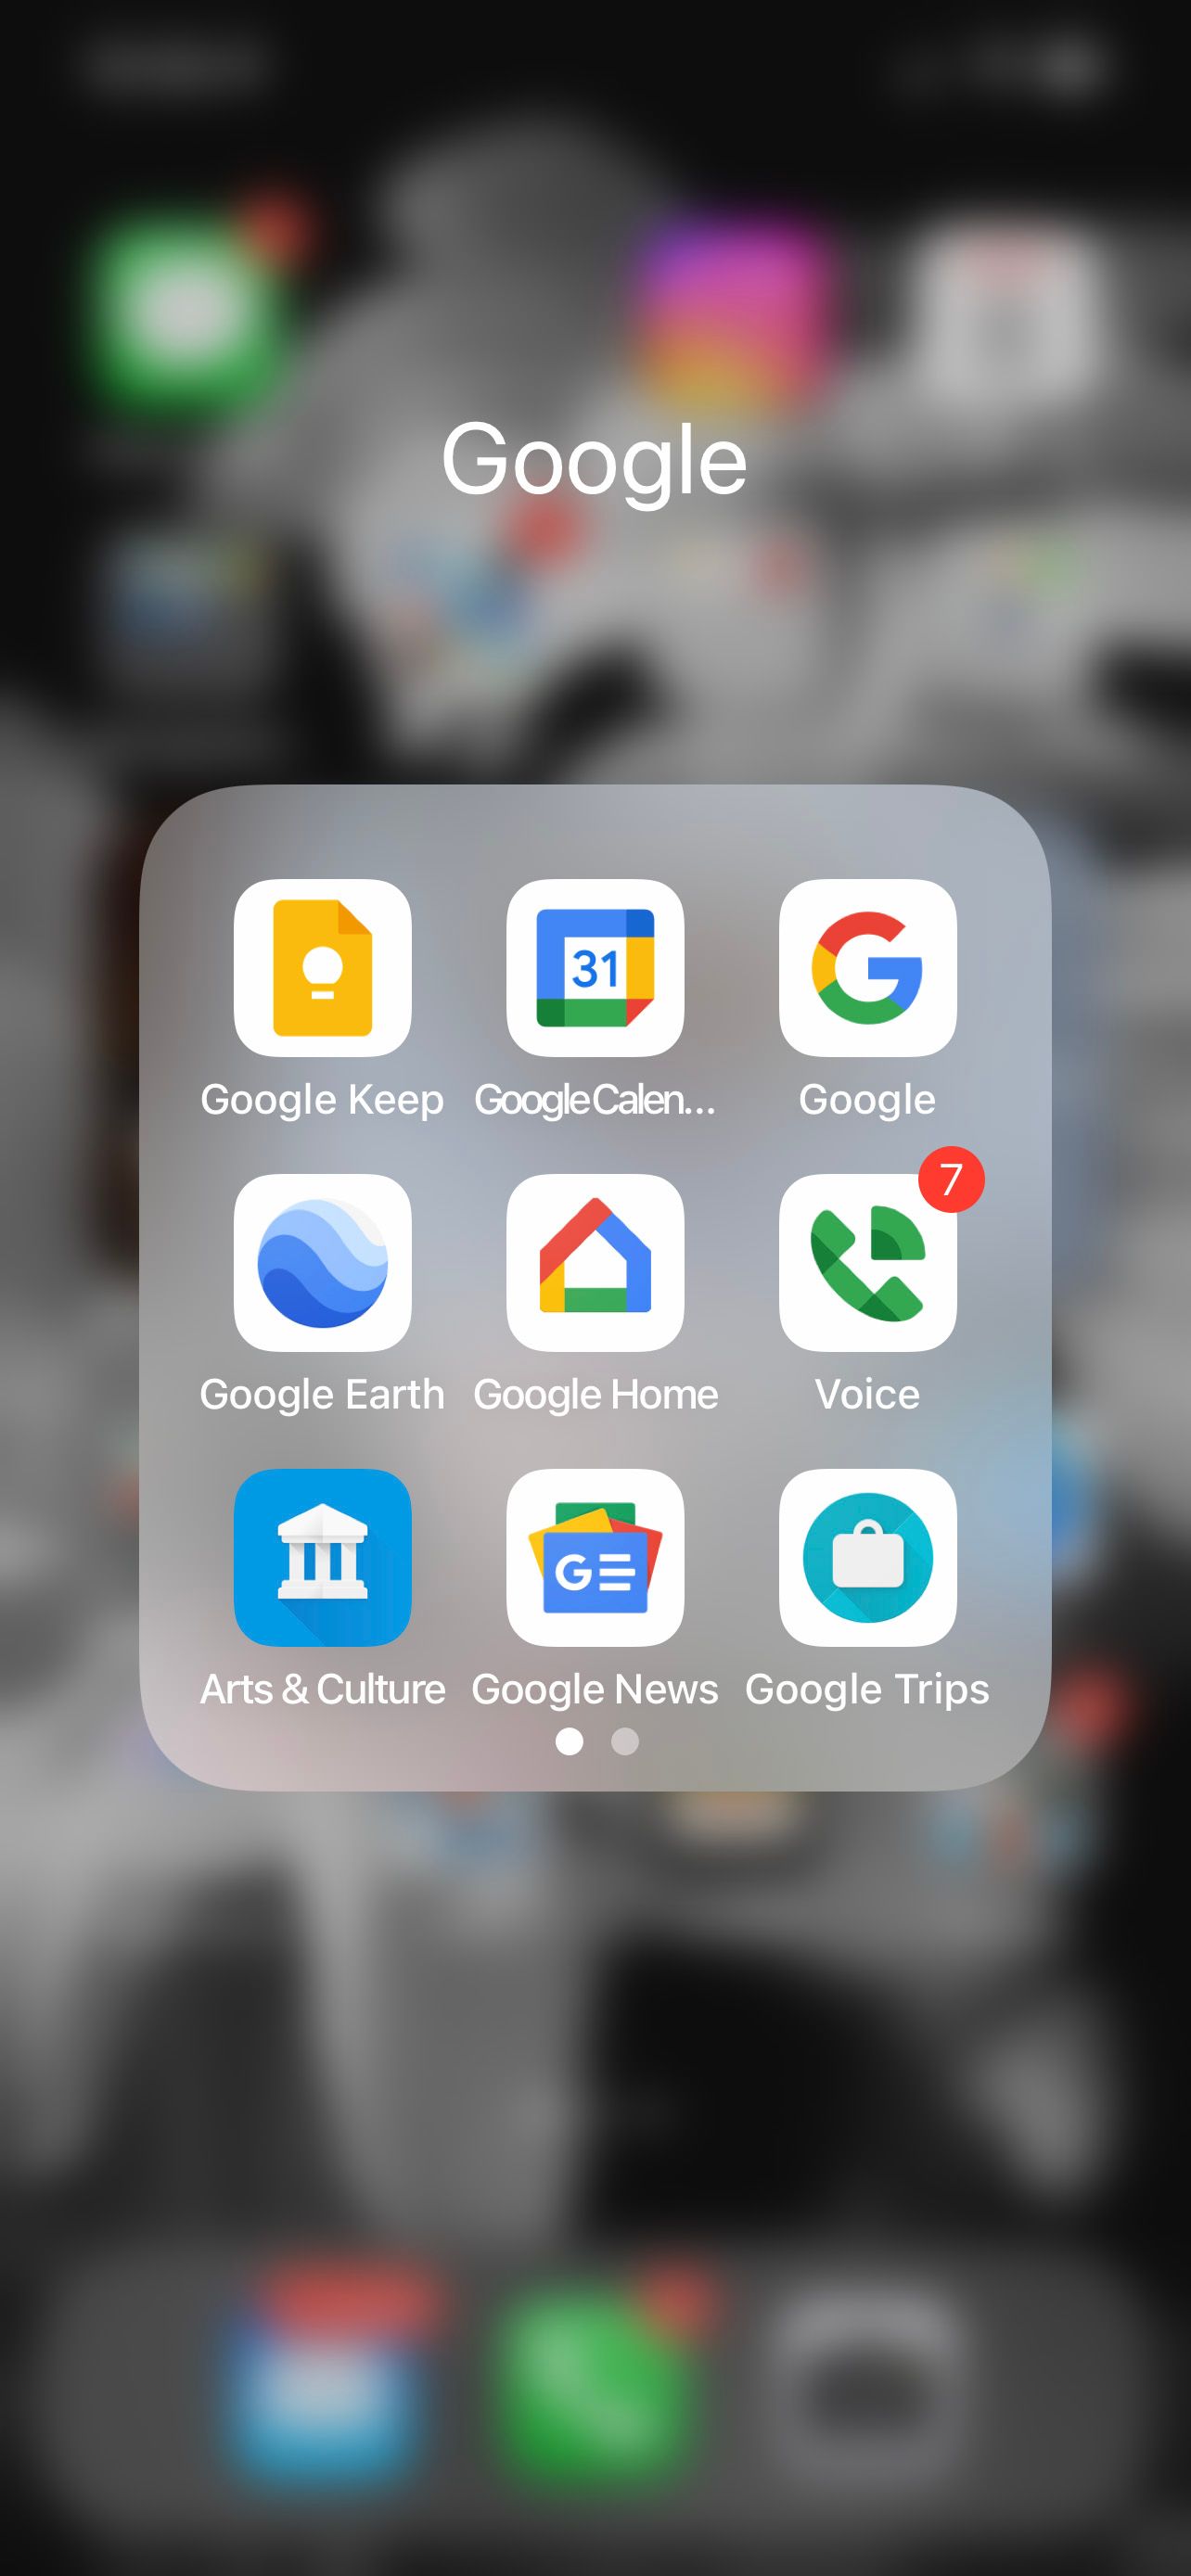 Google apps on phone including Google Home